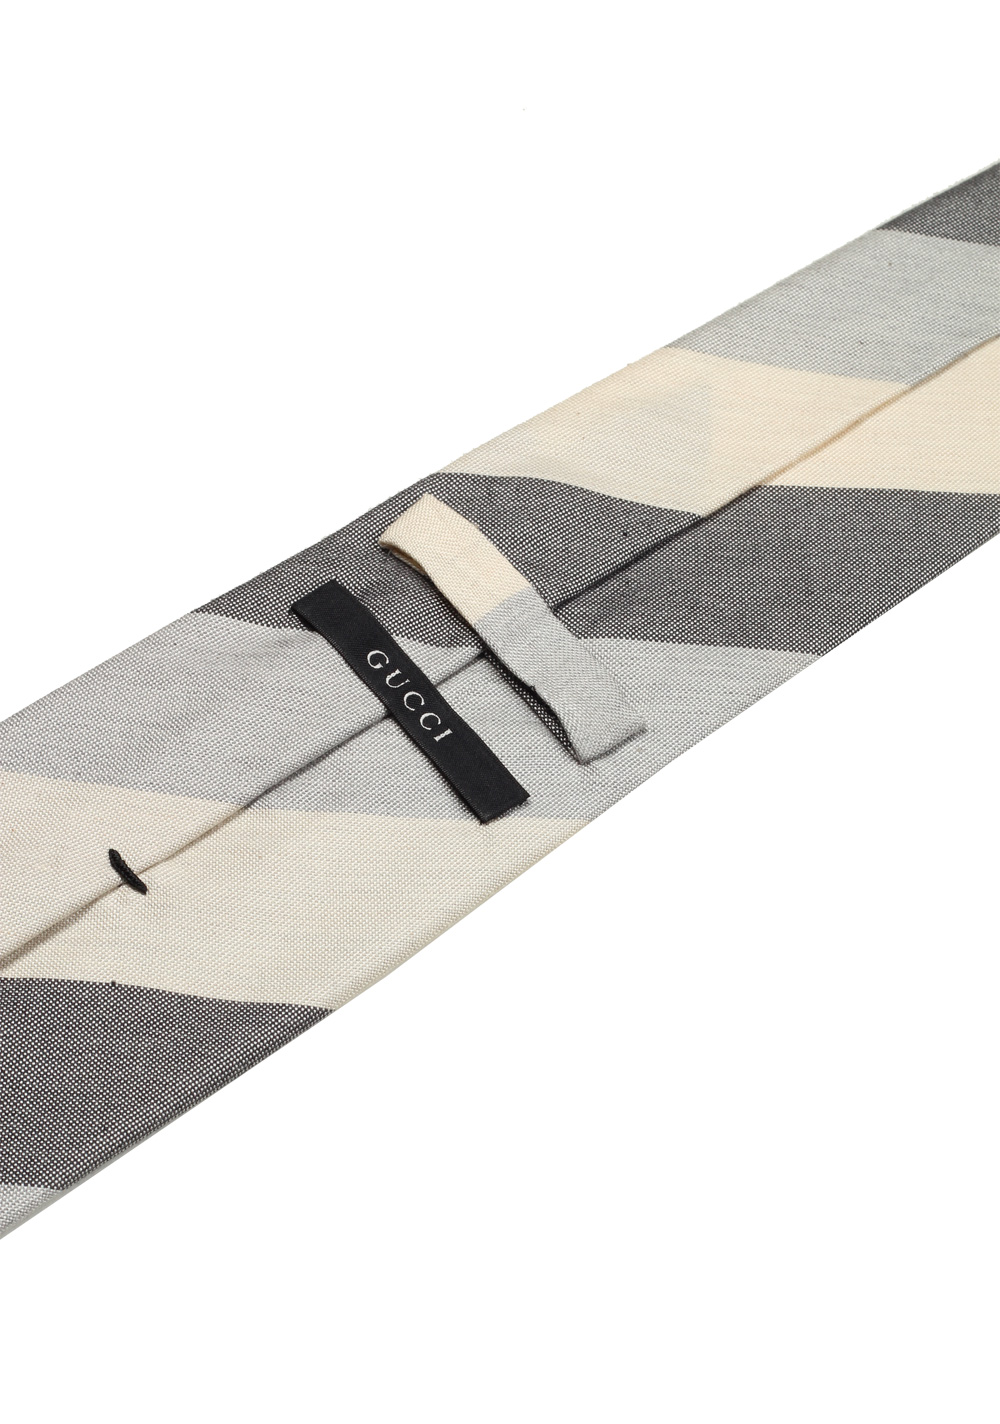 Gucci Gray Patterned Striped Tie | Costume Limité